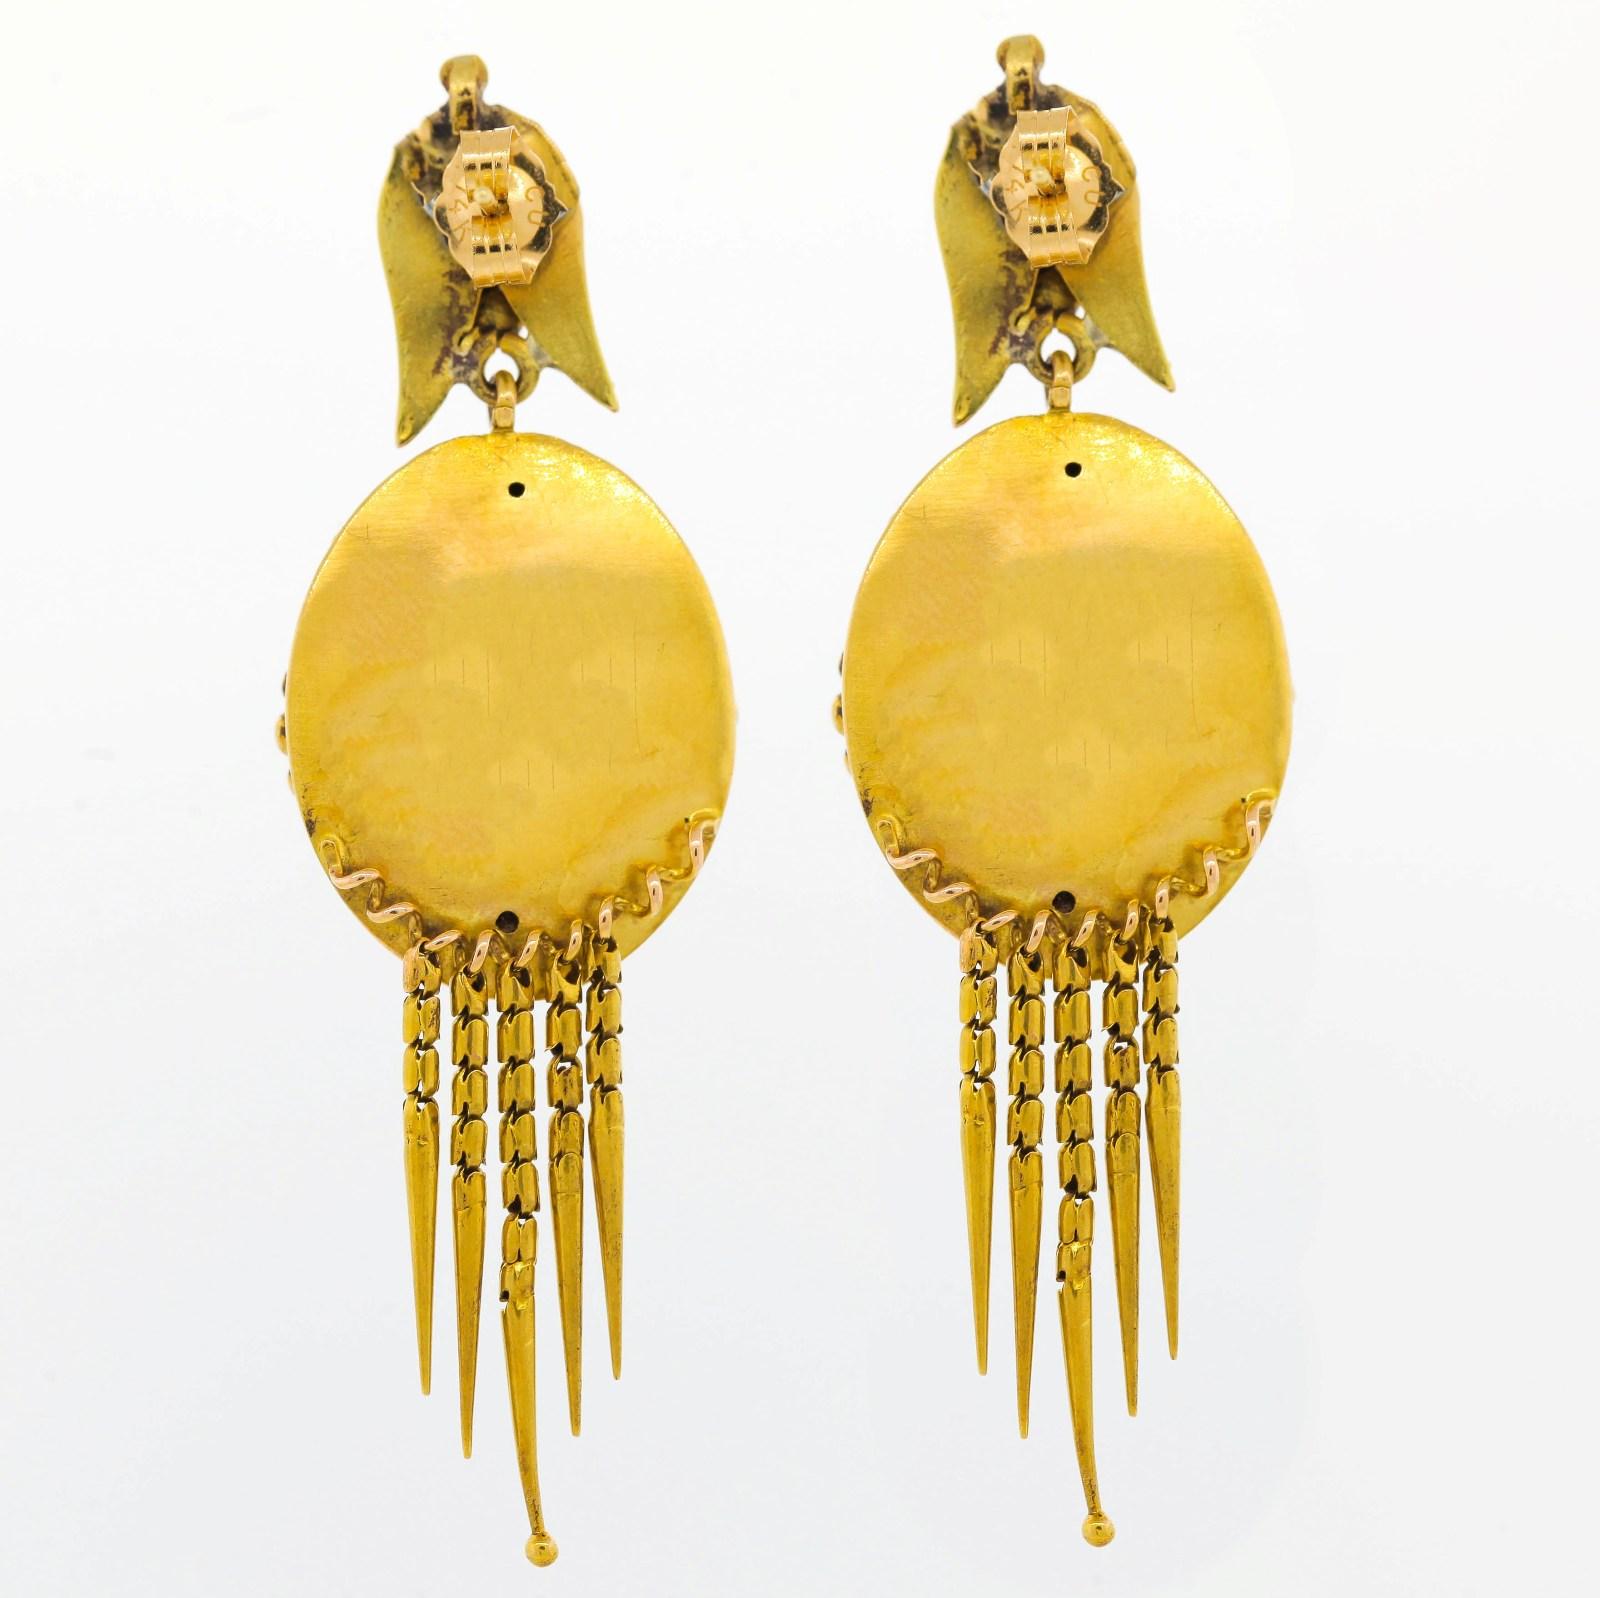 Circa 1890s oval shape earrings created in 14KT yellow gold and suspended from a finial.  They are dramatically adorned with five dangling tassels delicately ornamented. Understated but certain to be noticed!